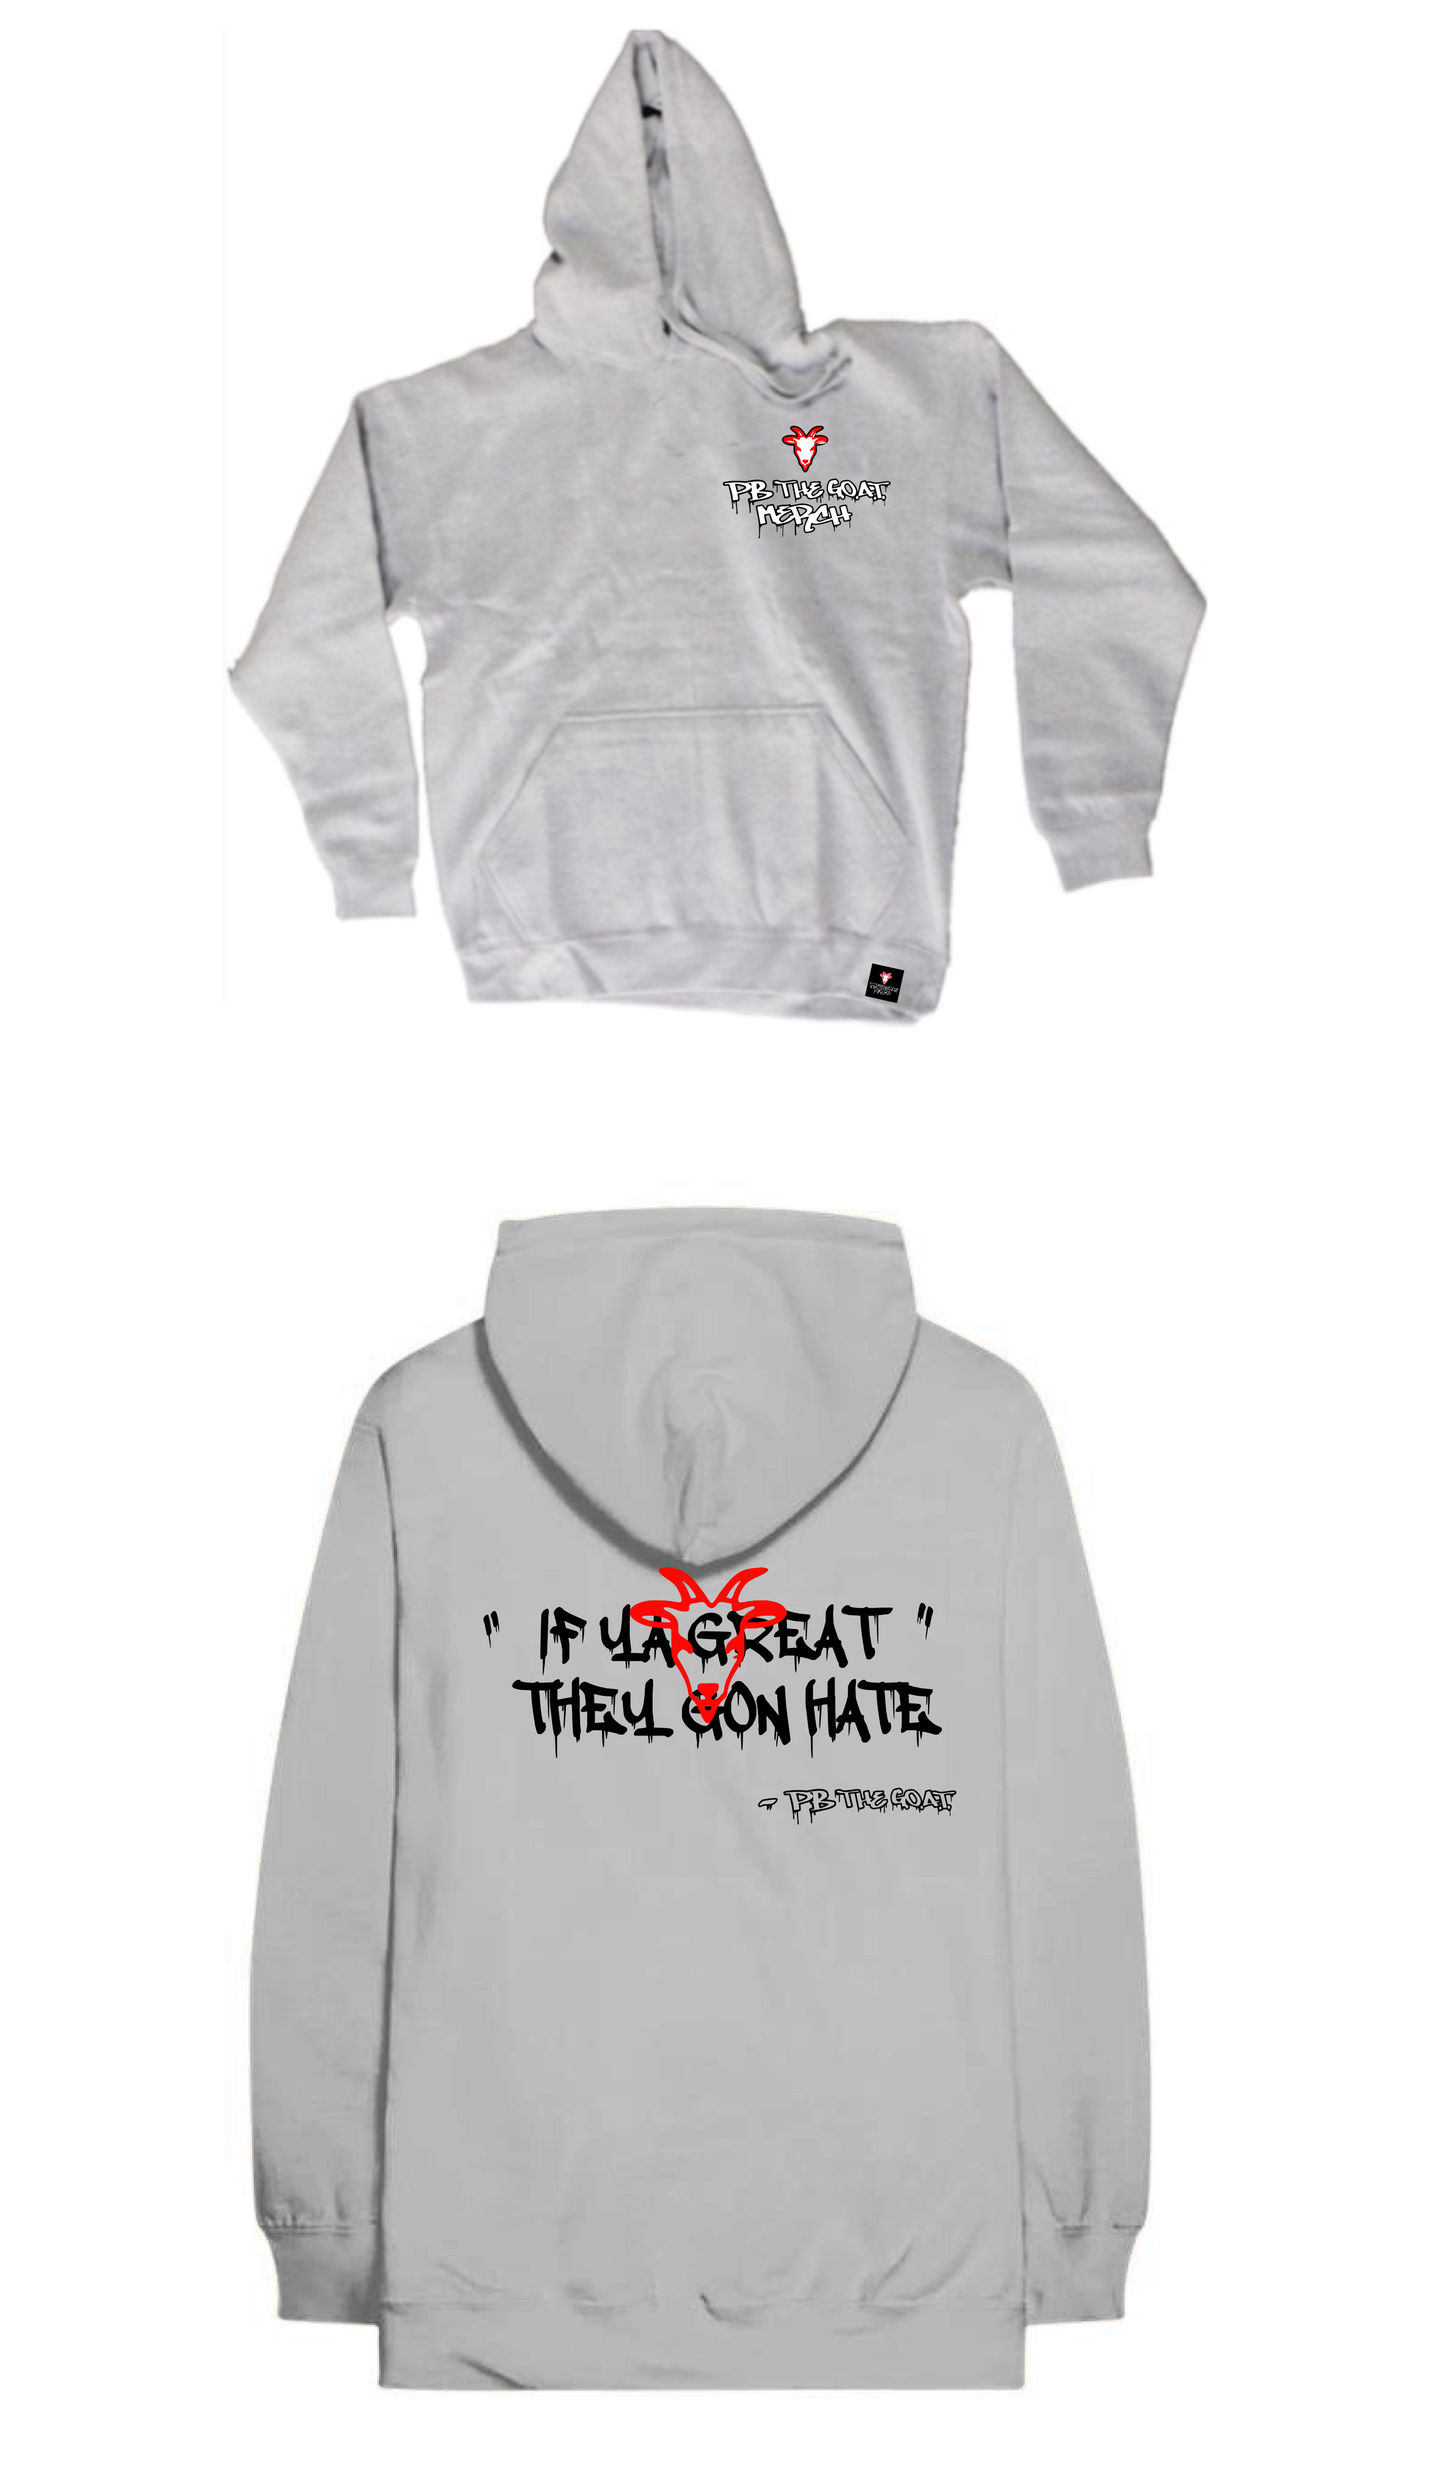 The Official Pb The Goat Merch Hoodie!